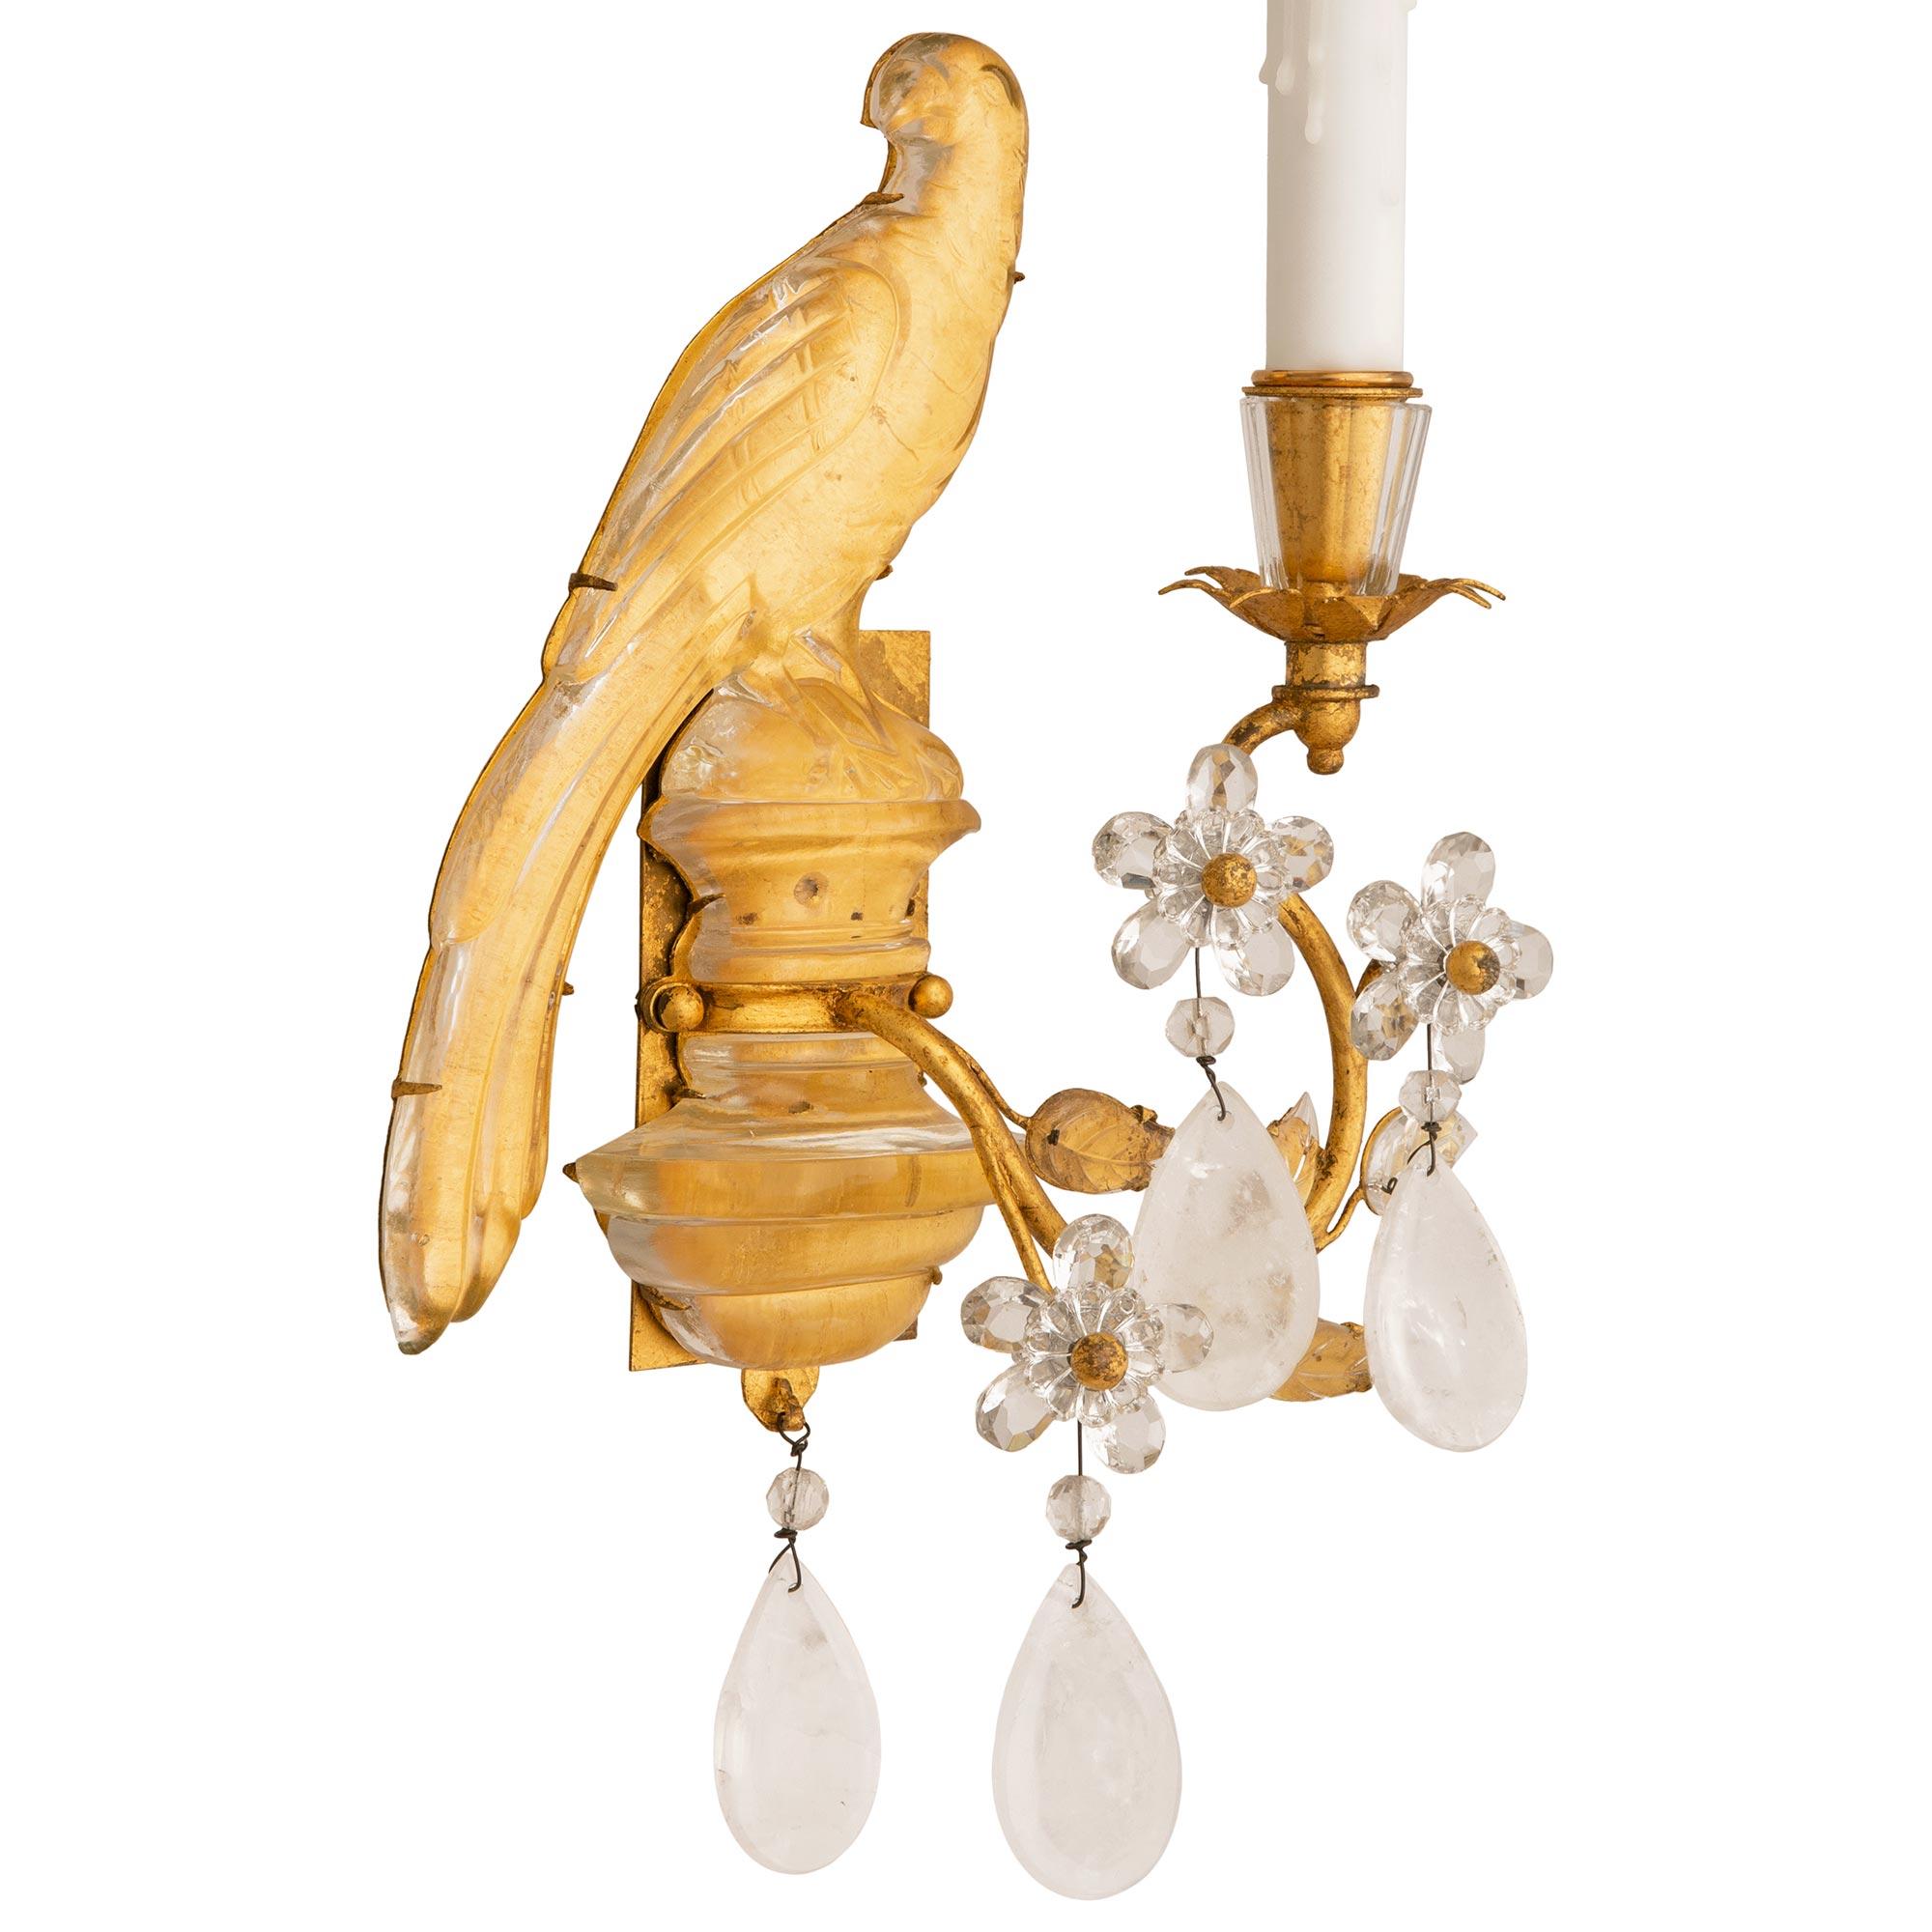 A beautiful and most decorative true pair of French turn of the century Louis XVI st. Rock Crystal and Gilt Metal sconces, attributed to Maison Baguès. Each single arm sconce displays a perched Rock Crystal parrot held by a Gilt Metal back plate.